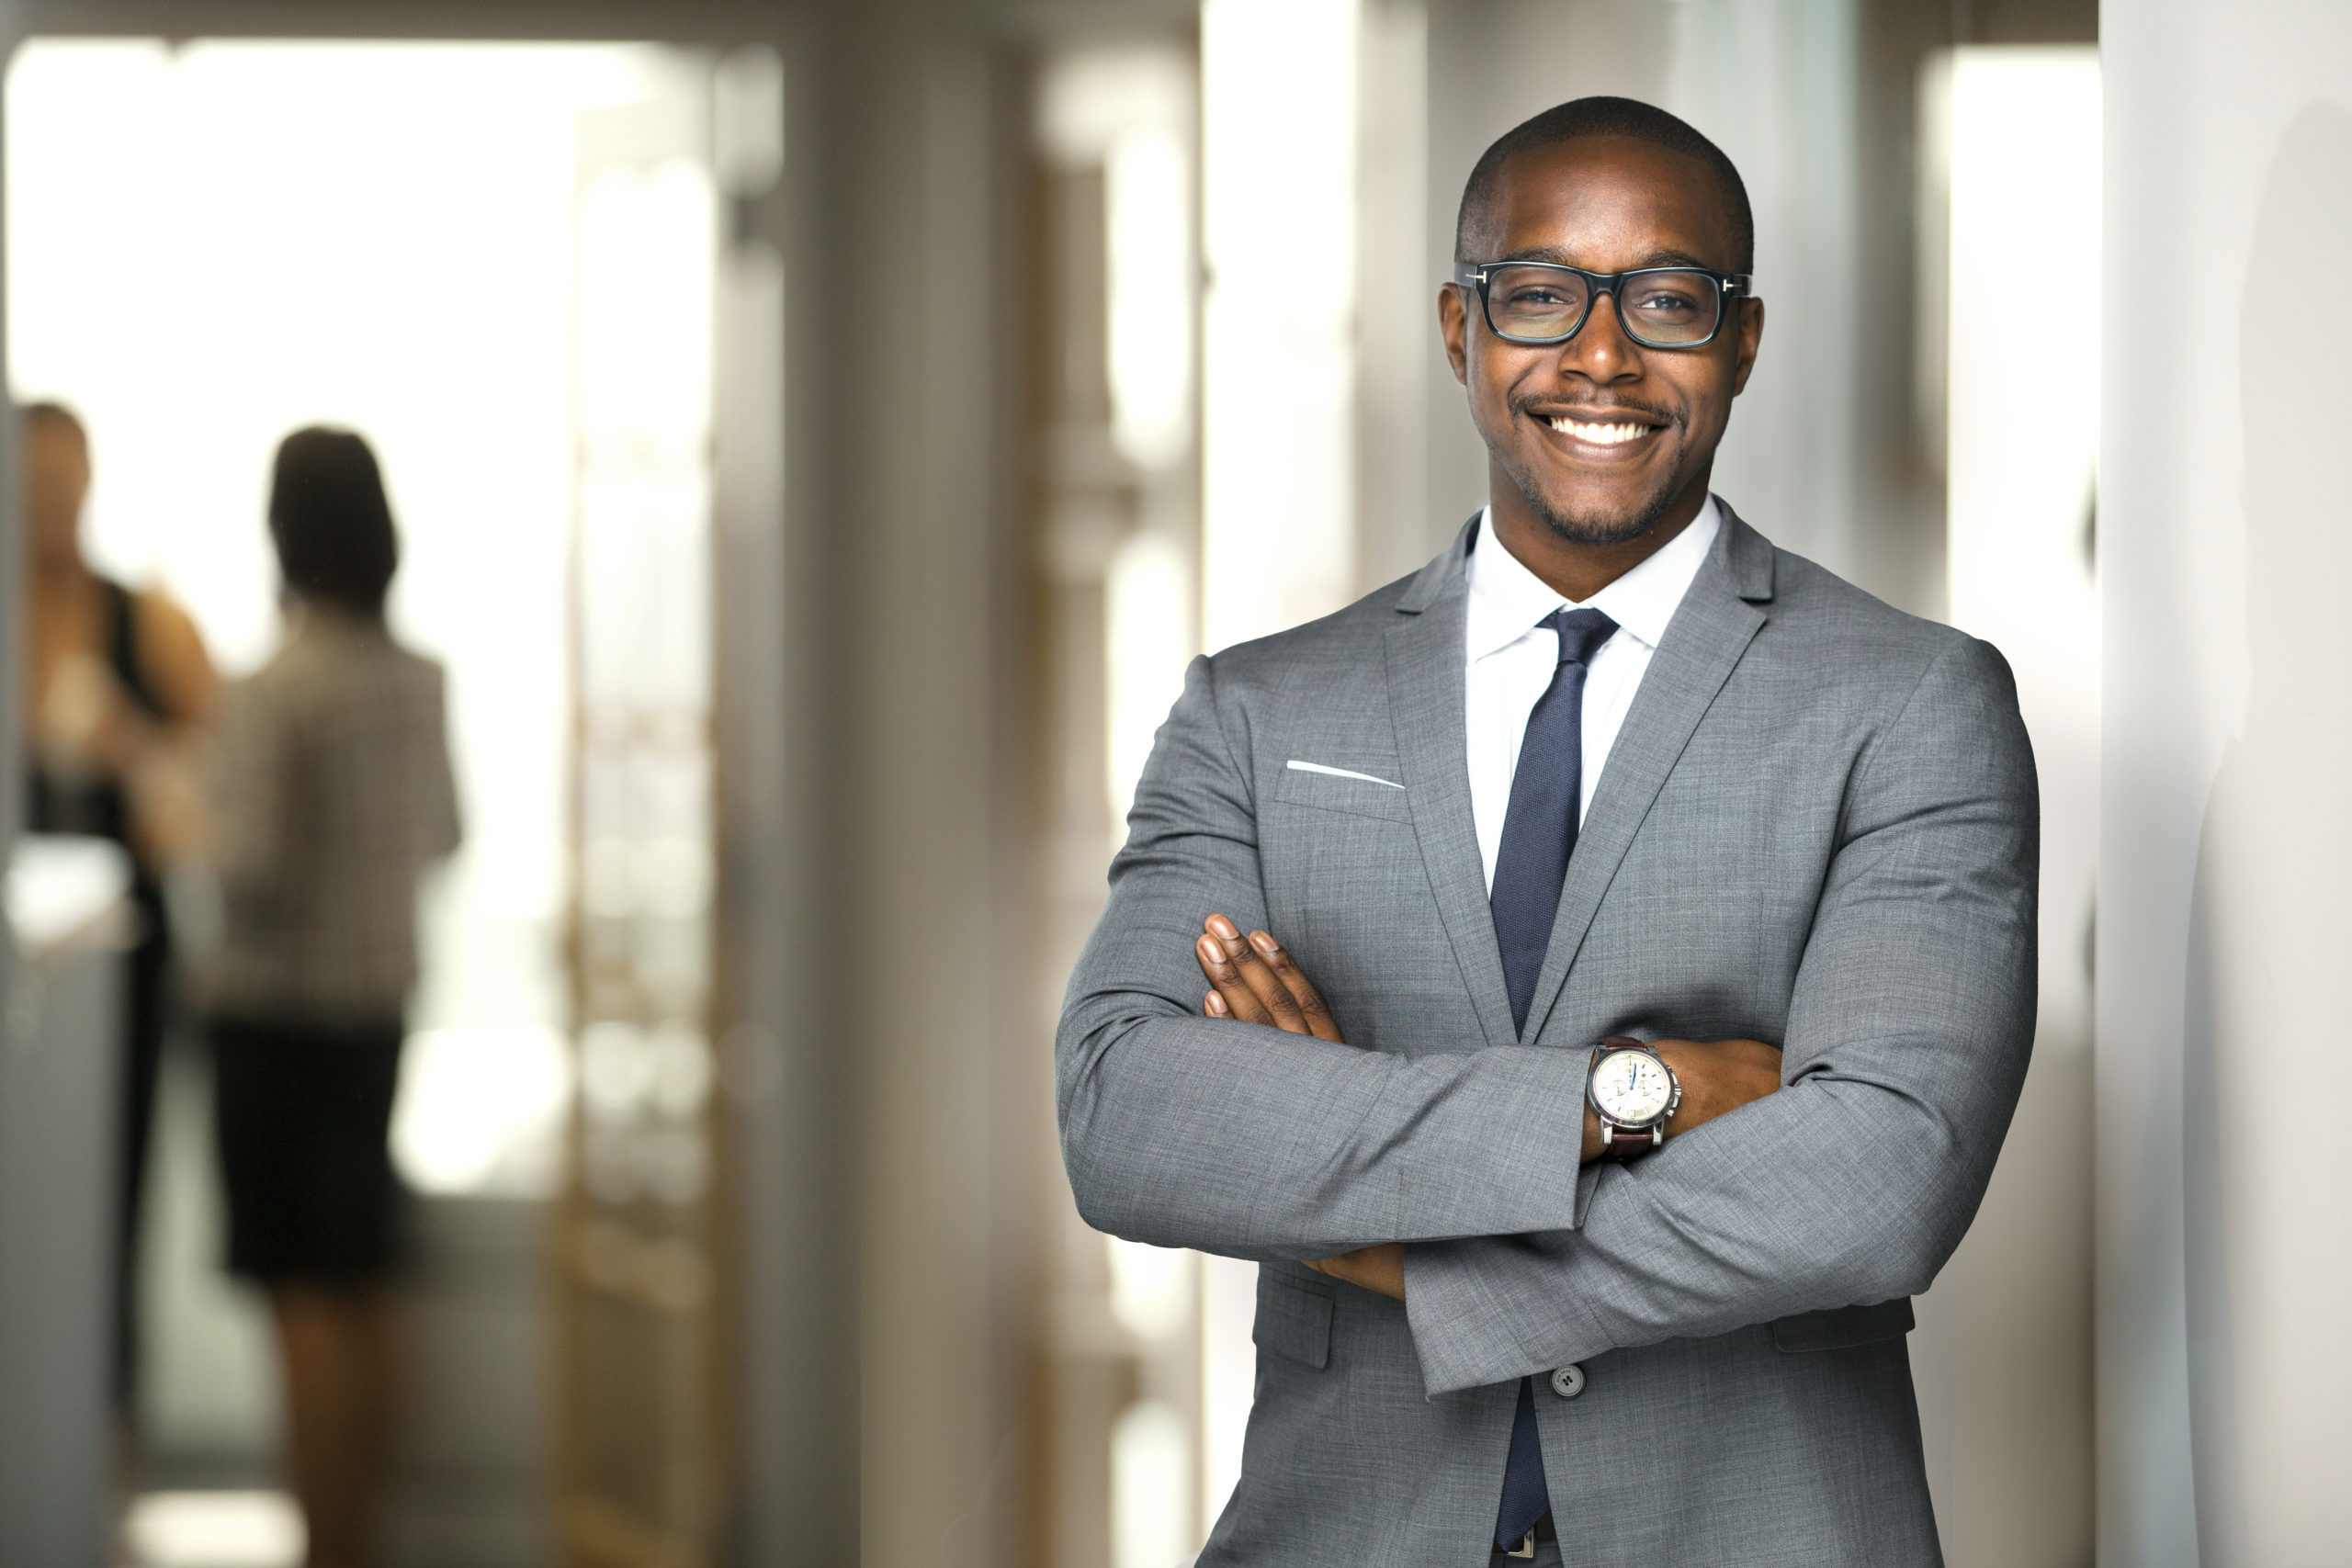 Young Business Professional Smiling